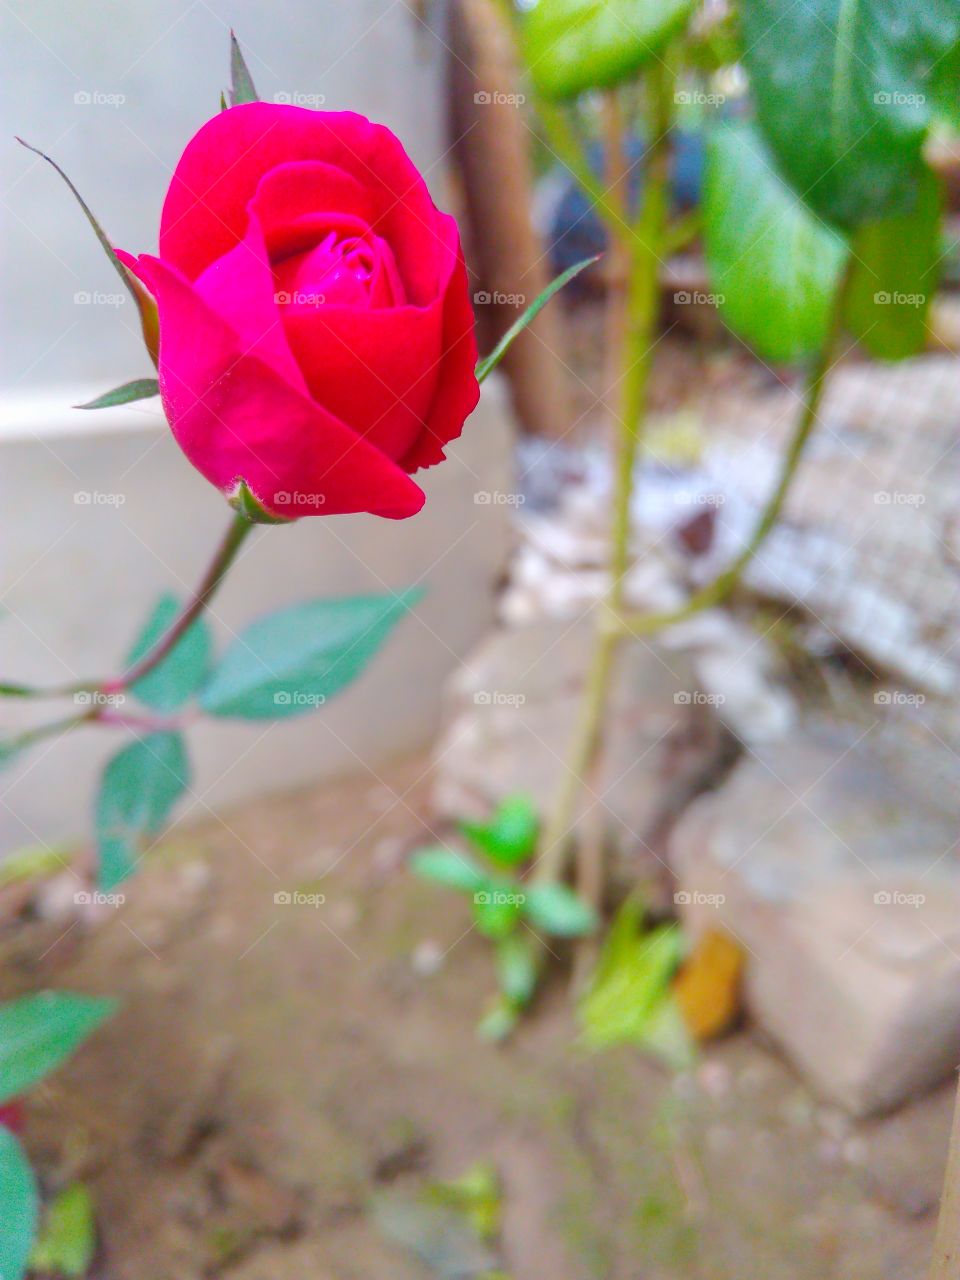 this rose is with a beautiful colour....